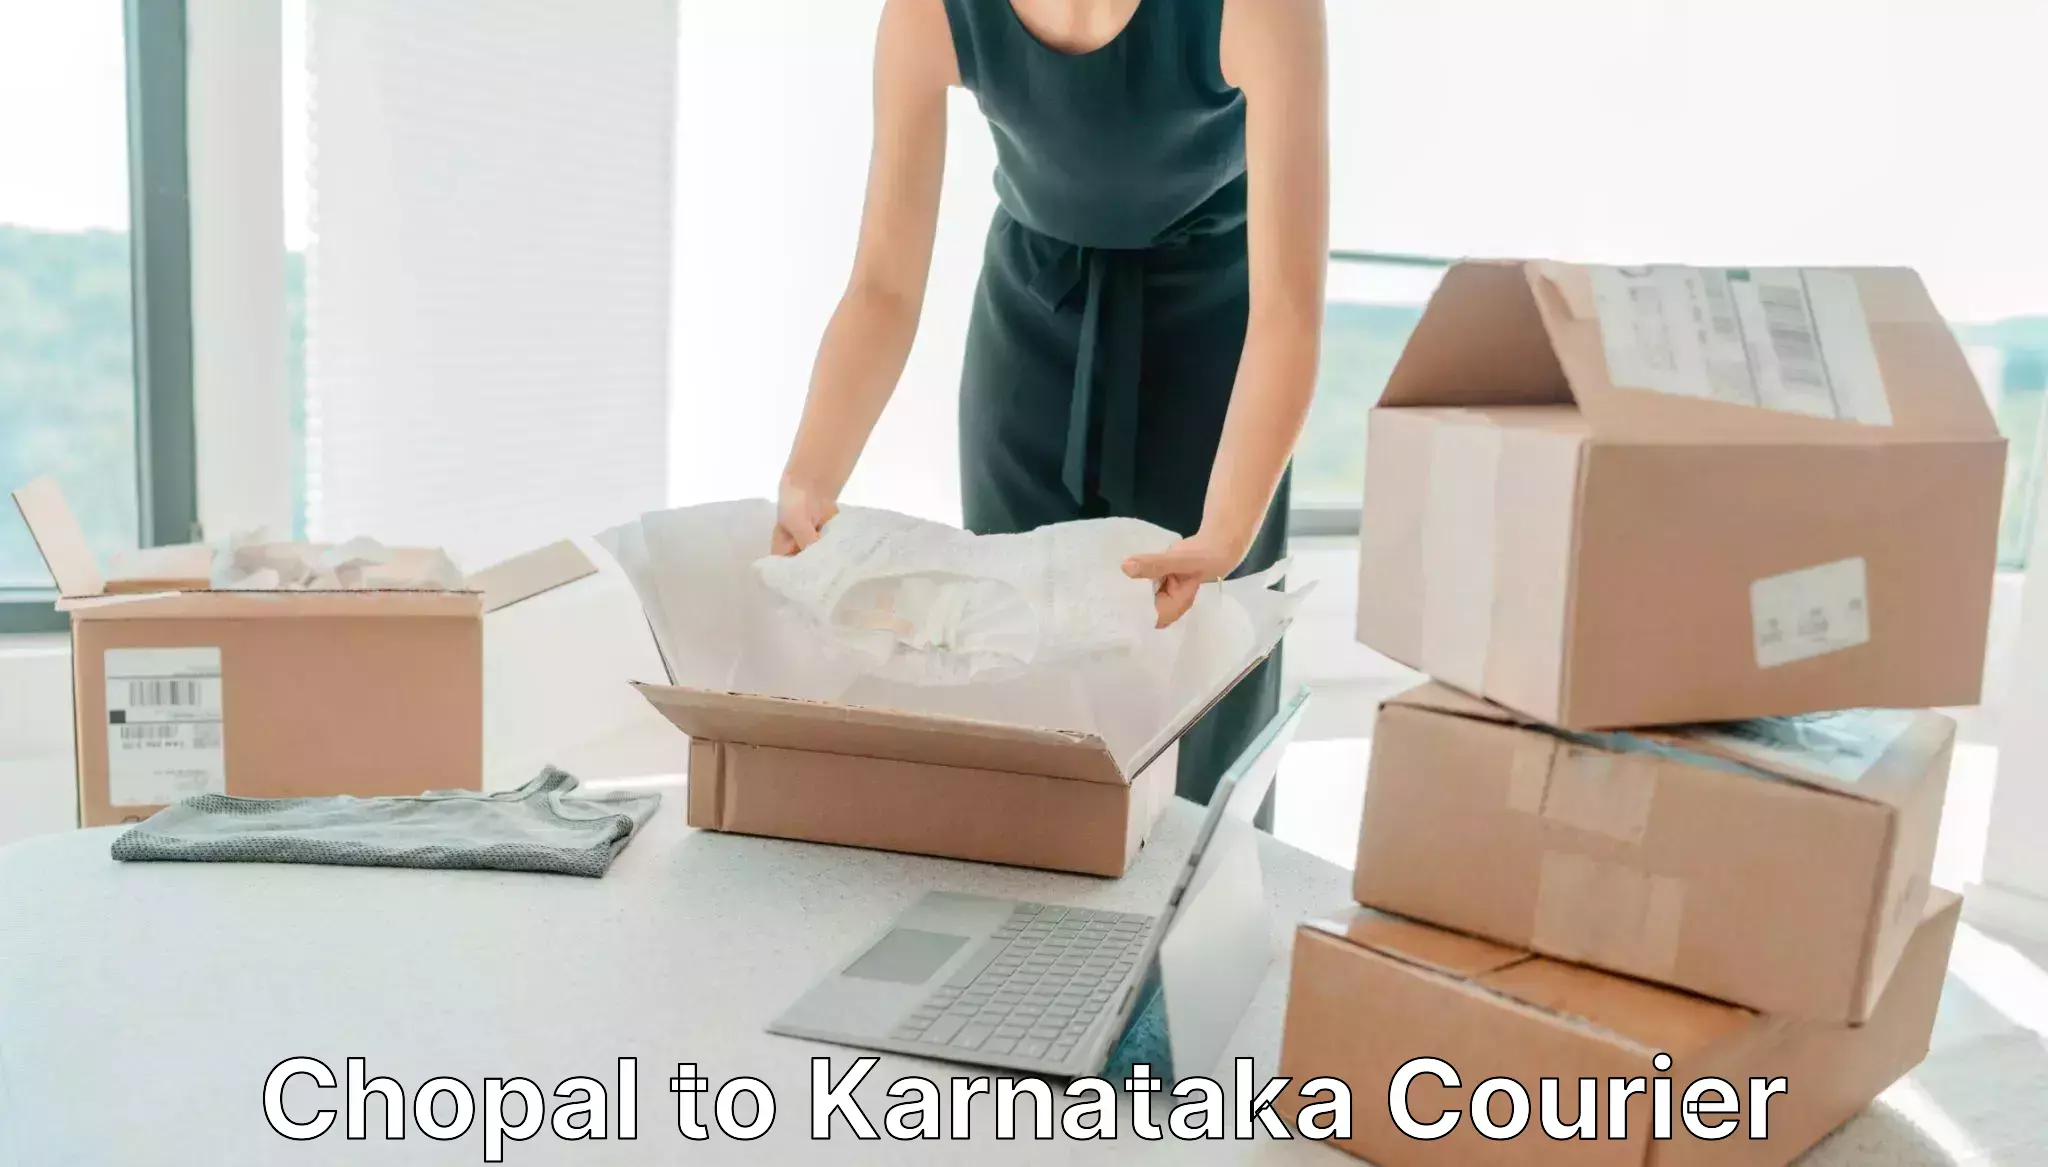 Next-day delivery options Chopal to Chikkamagaluru